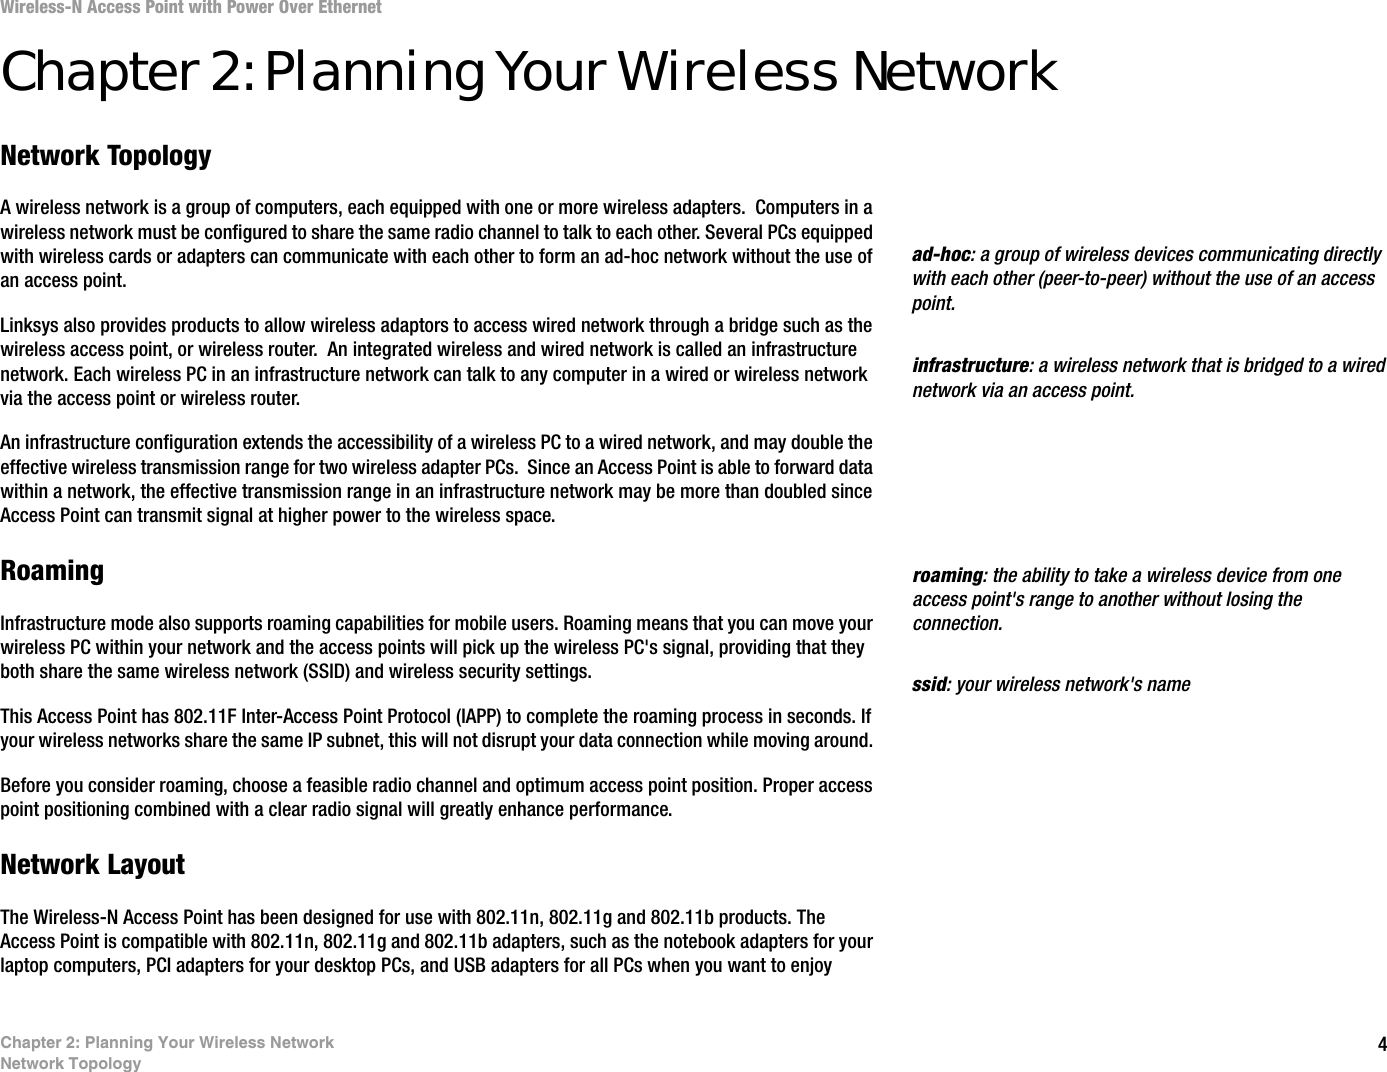 4Chapter 2: Planning Your Wireless NetworkNetwork TopologyWireless-N Access Point with Power Over EthernetChapter 2: Planning Your Wireless NetworkNetwork TopologyA wireless network is a group of computers, each equipped with one or more wireless adapters.  Computers in a wireless network must be configured to share the same radio channel to talk to each other. Several PCs equipped with wireless cards or adapters can communicate with each other to form an ad-hoc network without the use of an access point.Linksys also provides products to allow wireless adaptors to access wired network through a bridge such as the wireless access point, or wireless router.  An integrated wireless and wired network is called an infrastructure network. Each wireless PC in an infrastructure network can talk to any computer in a wired or wireless network via the access point or wireless router.An infrastructure configuration extends the accessibility of a wireless PC to a wired network, and may double the effective wireless transmission range for two wireless adapter PCs.  Since an Access Point is able to forward data within a network, the effective transmission range in an infrastructure network may be more than doubled since Access Point can transmit signal at higher power to the wireless space.RoamingInfrastructure mode also supports roaming capabilities for mobile users. Roaming means that you can move your wireless PC within your network and the access points will pick up the wireless PC&apos;s signal, providing that they both share the same wireless network (SSID) and wireless security settings.This Access Point has 802.11F Inter-Access Point Protocol (IAPP) to complete the roaming process in seconds. If your wireless networks share the same IP subnet, this will not disrupt your data connection while moving around. Before you consider roaming, choose a feasible radio channel and optimum access point position. Proper access point positioning combined with a clear radio signal will greatly enhance performance.Network LayoutThe Wireless-N Access Point has been designed for use with 802.11n, 802.11g and 802.11b products. The Access Point is compatible with 802.11n, 802.11g and 802.11b adapters, such as the notebook adapters for your laptop computers, PCI adapters for your desktop PCs, and USB adapters for all PCs when you want to enjoy infrastructure: a wireless network that is bridged to a wired network via an access point.ad-hoc: a group of wireless devices communicating directly with each other (peer-to-peer) without the use of an access point.roaming: the ability to take a wireless device from one access point&apos;s range to another without losing the connection.ssid: your wireless network&apos;s name